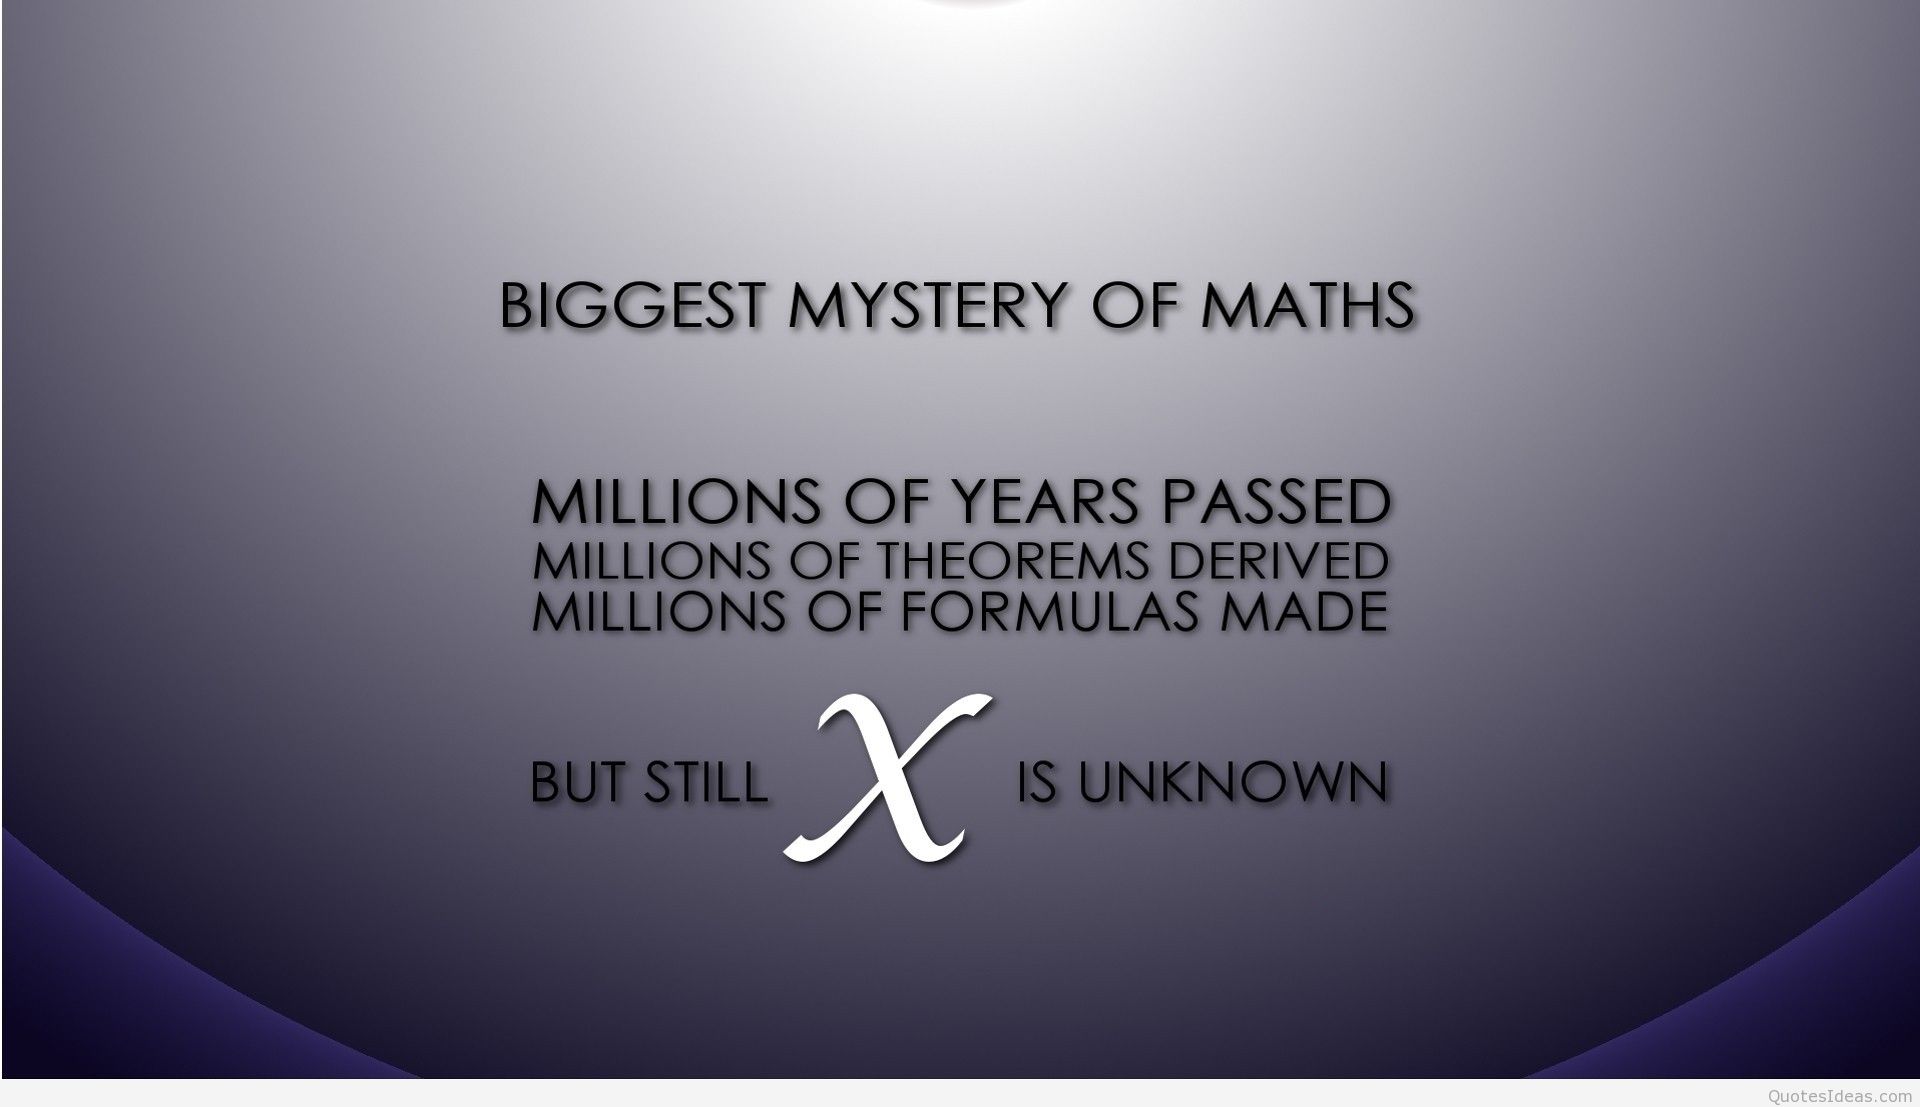 Biggest Mystery of Maths millions of years passed; Millions of theorems derived; Millions of formulas made; But still, X is unknown